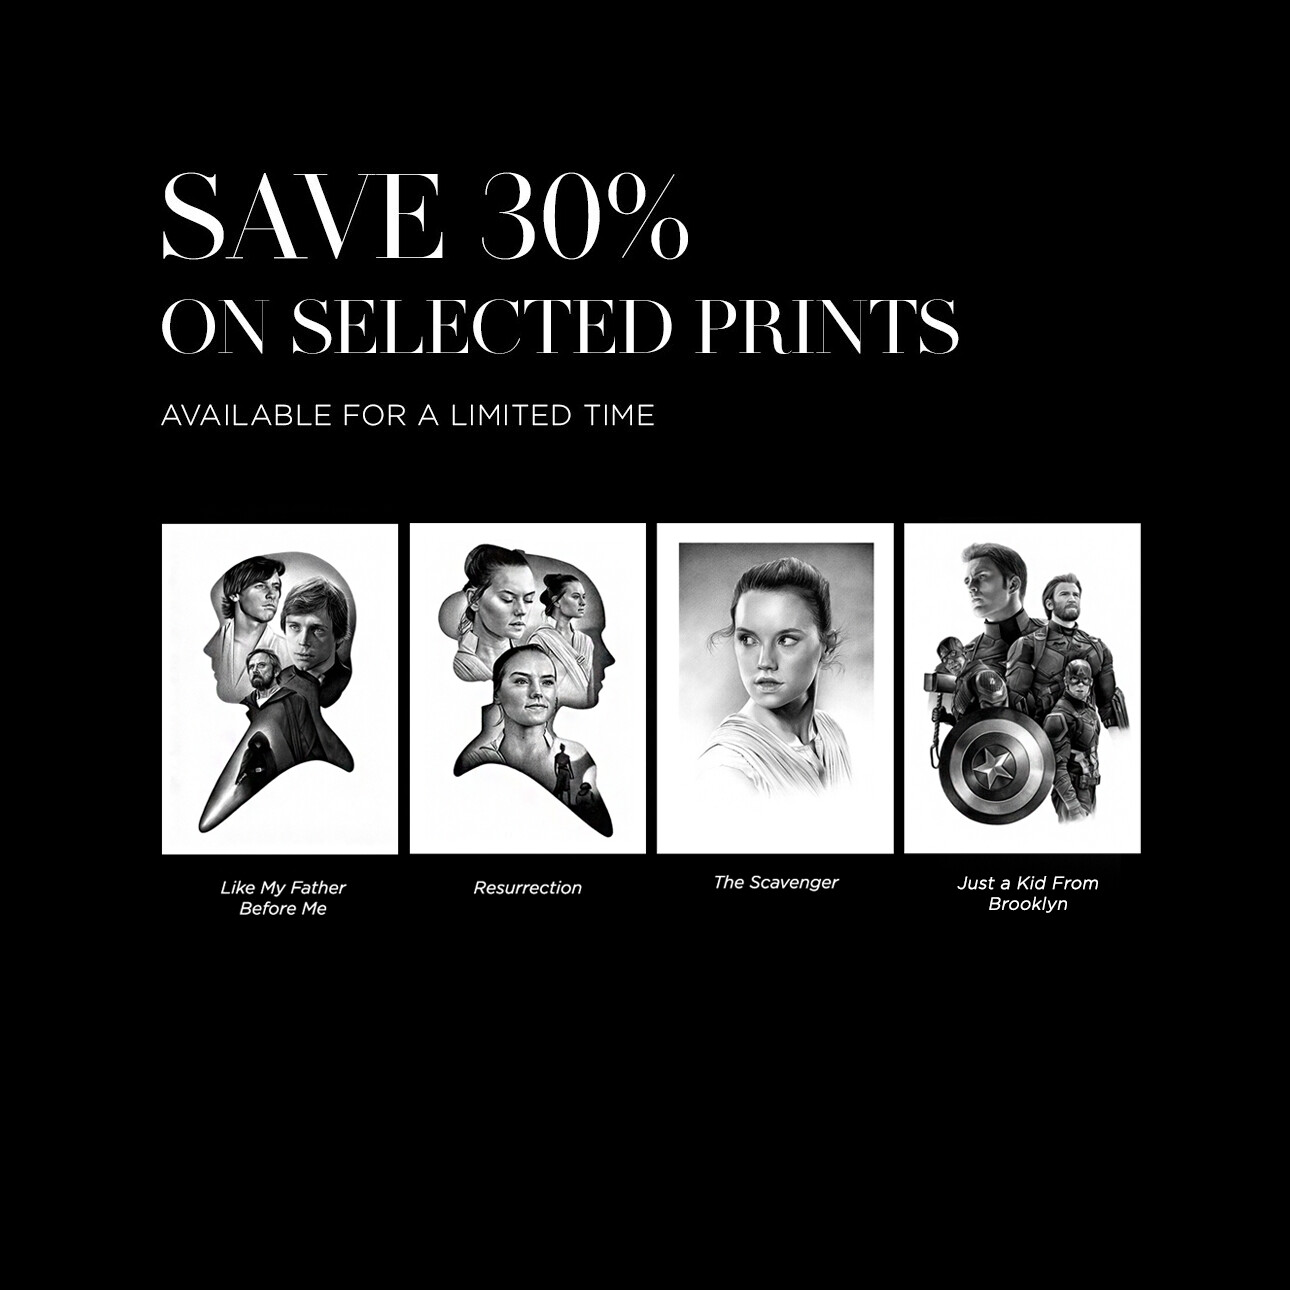 SAVE 30% ON SELECTED PRINTS